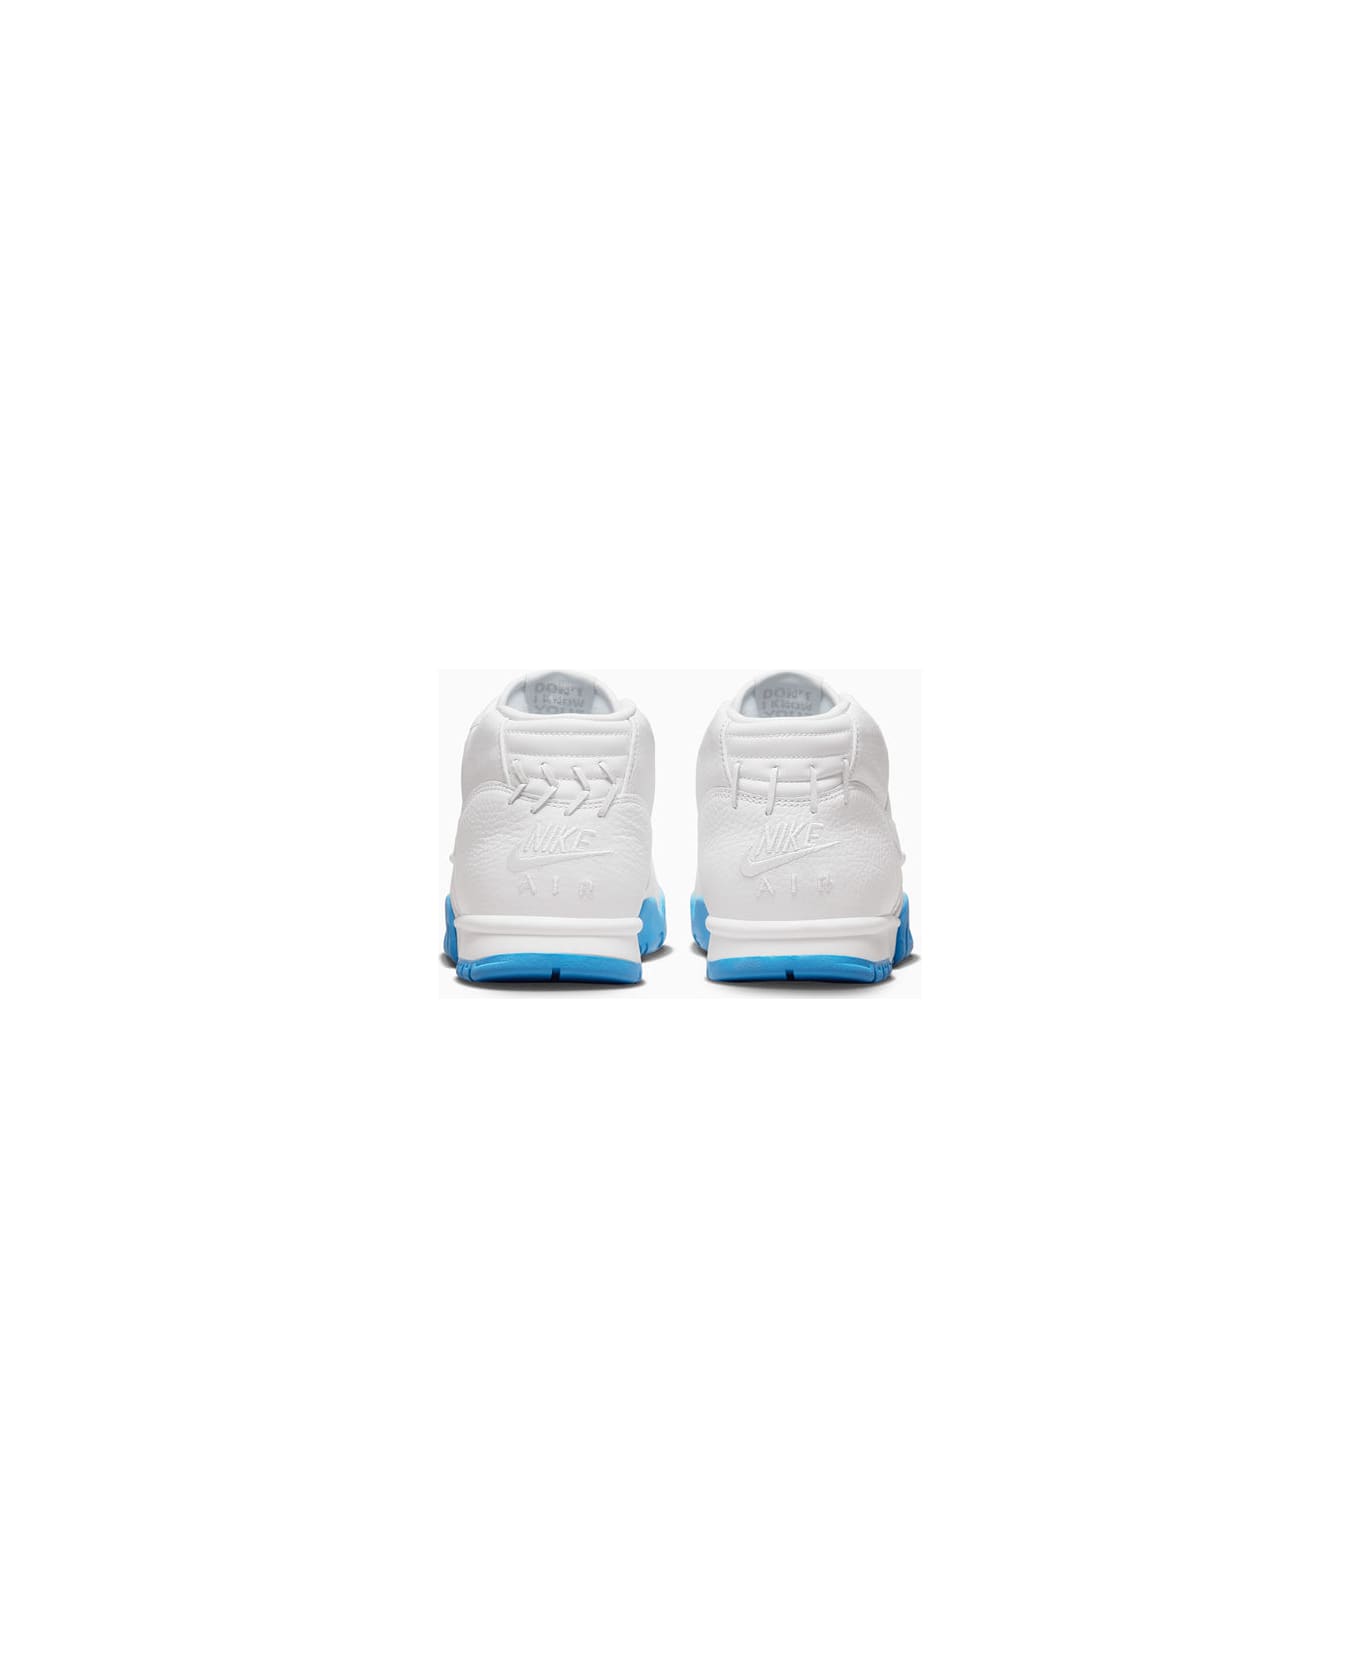 Nike Air Trainer 1 Sneakers Dr9997-100 - White スニーカー